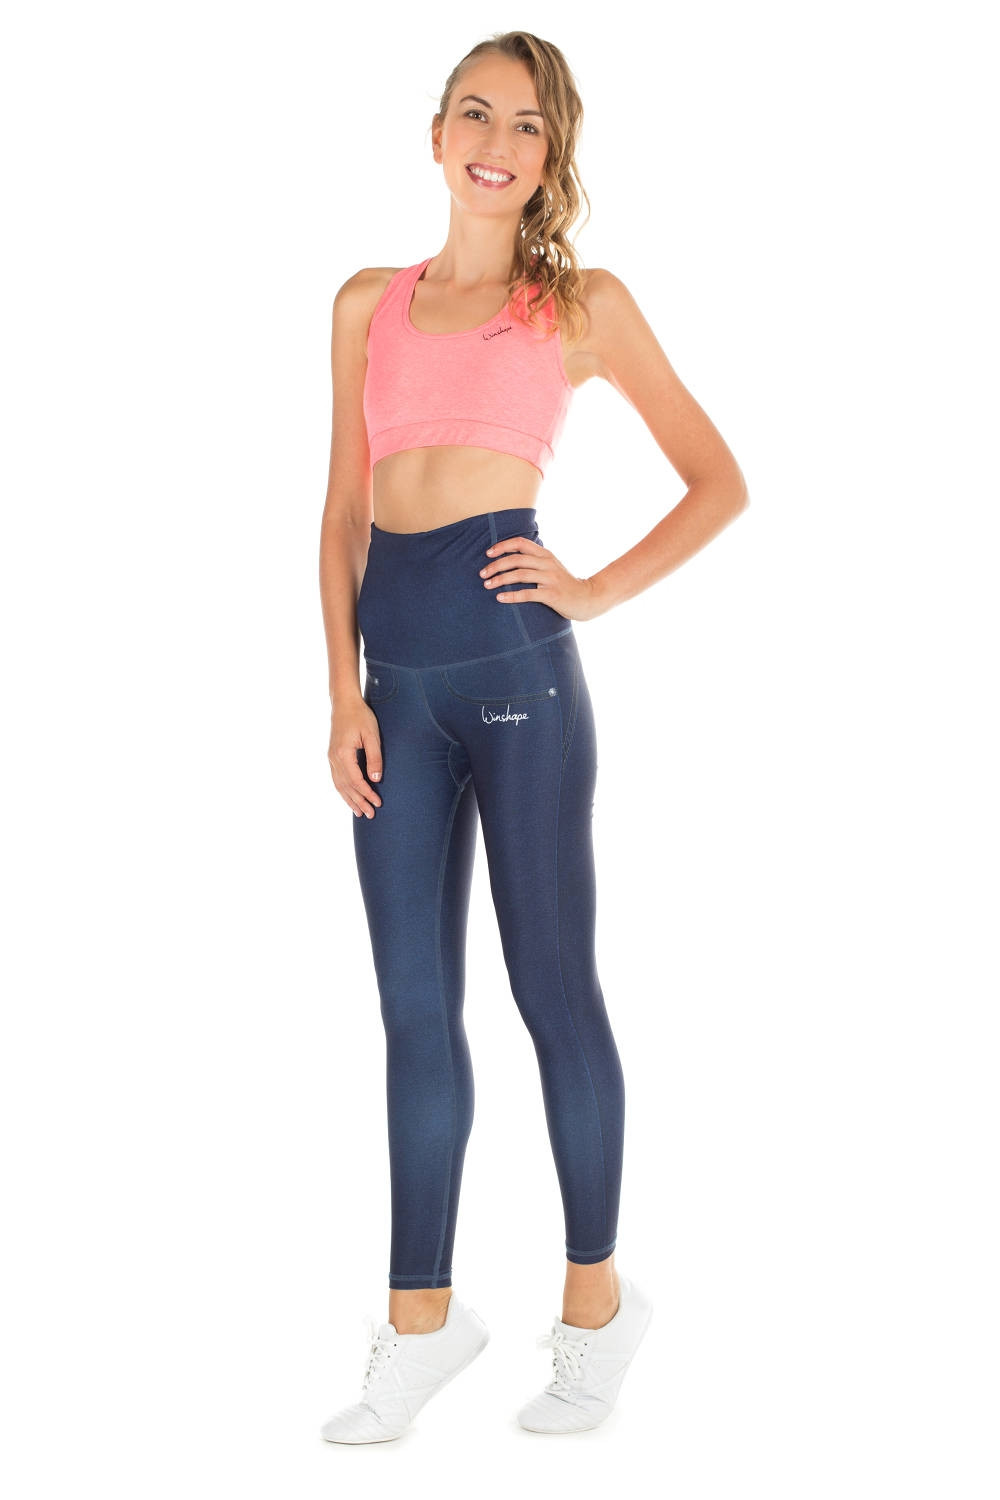 Functional Power Shape Jeans Tights High Waist “Bootylicious” HWL102, rich  blue, Winshape Slim Style